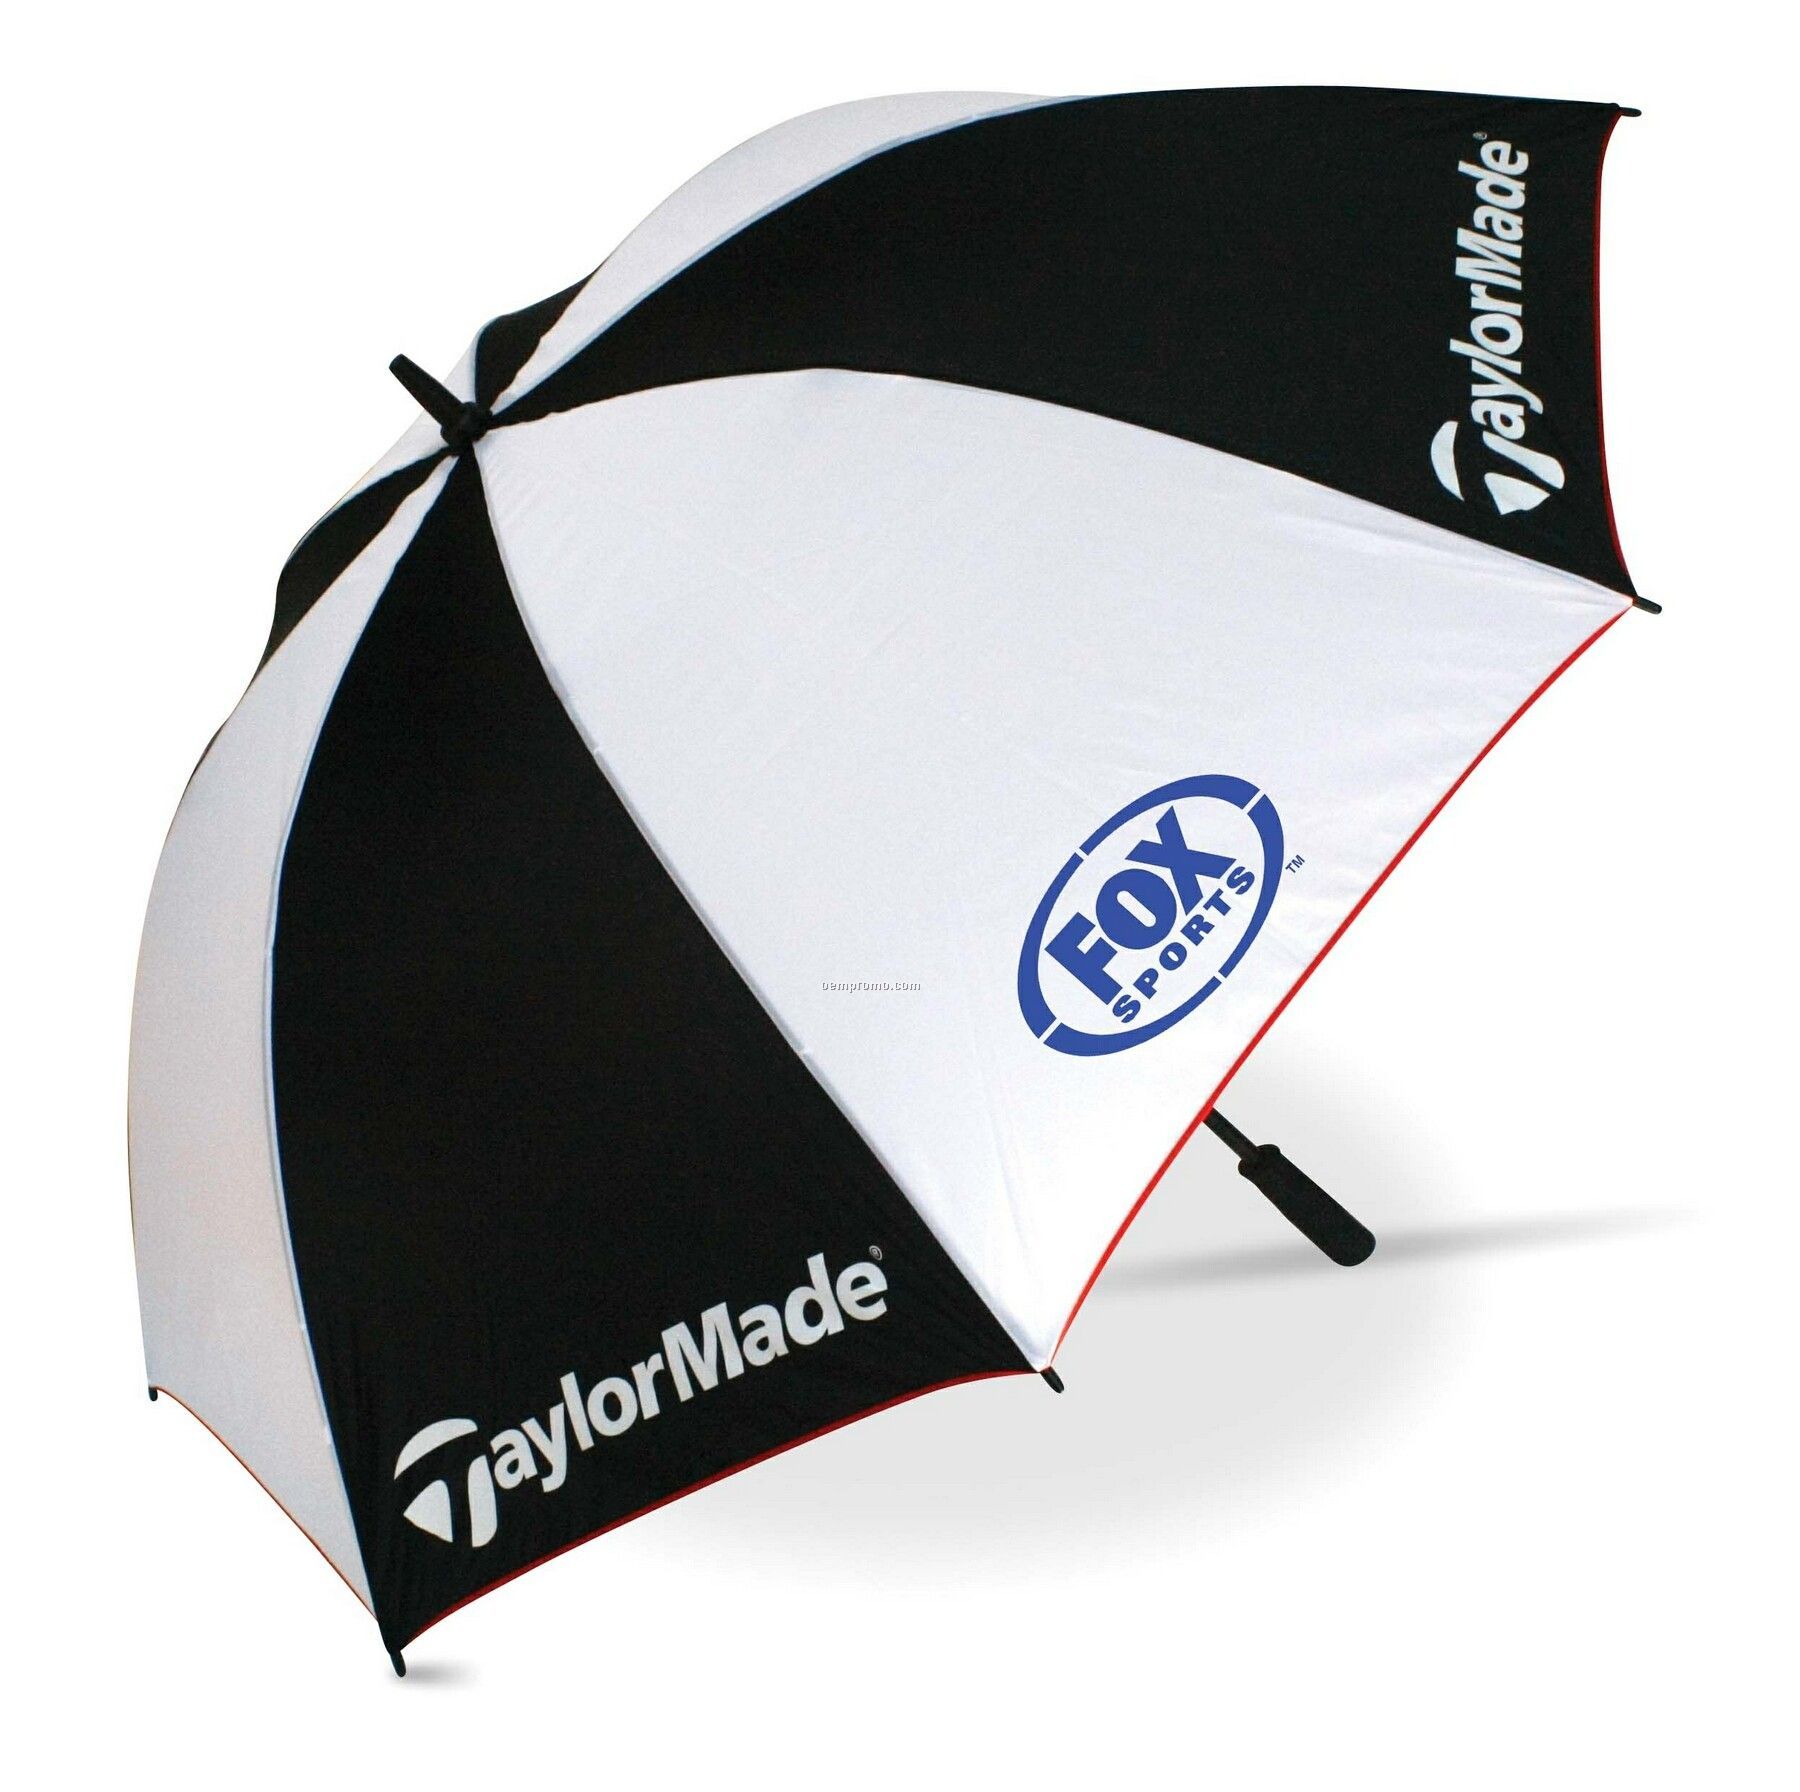 Taylormade Single Canopy 60" Golf Umbrella W/ Perforated Handle